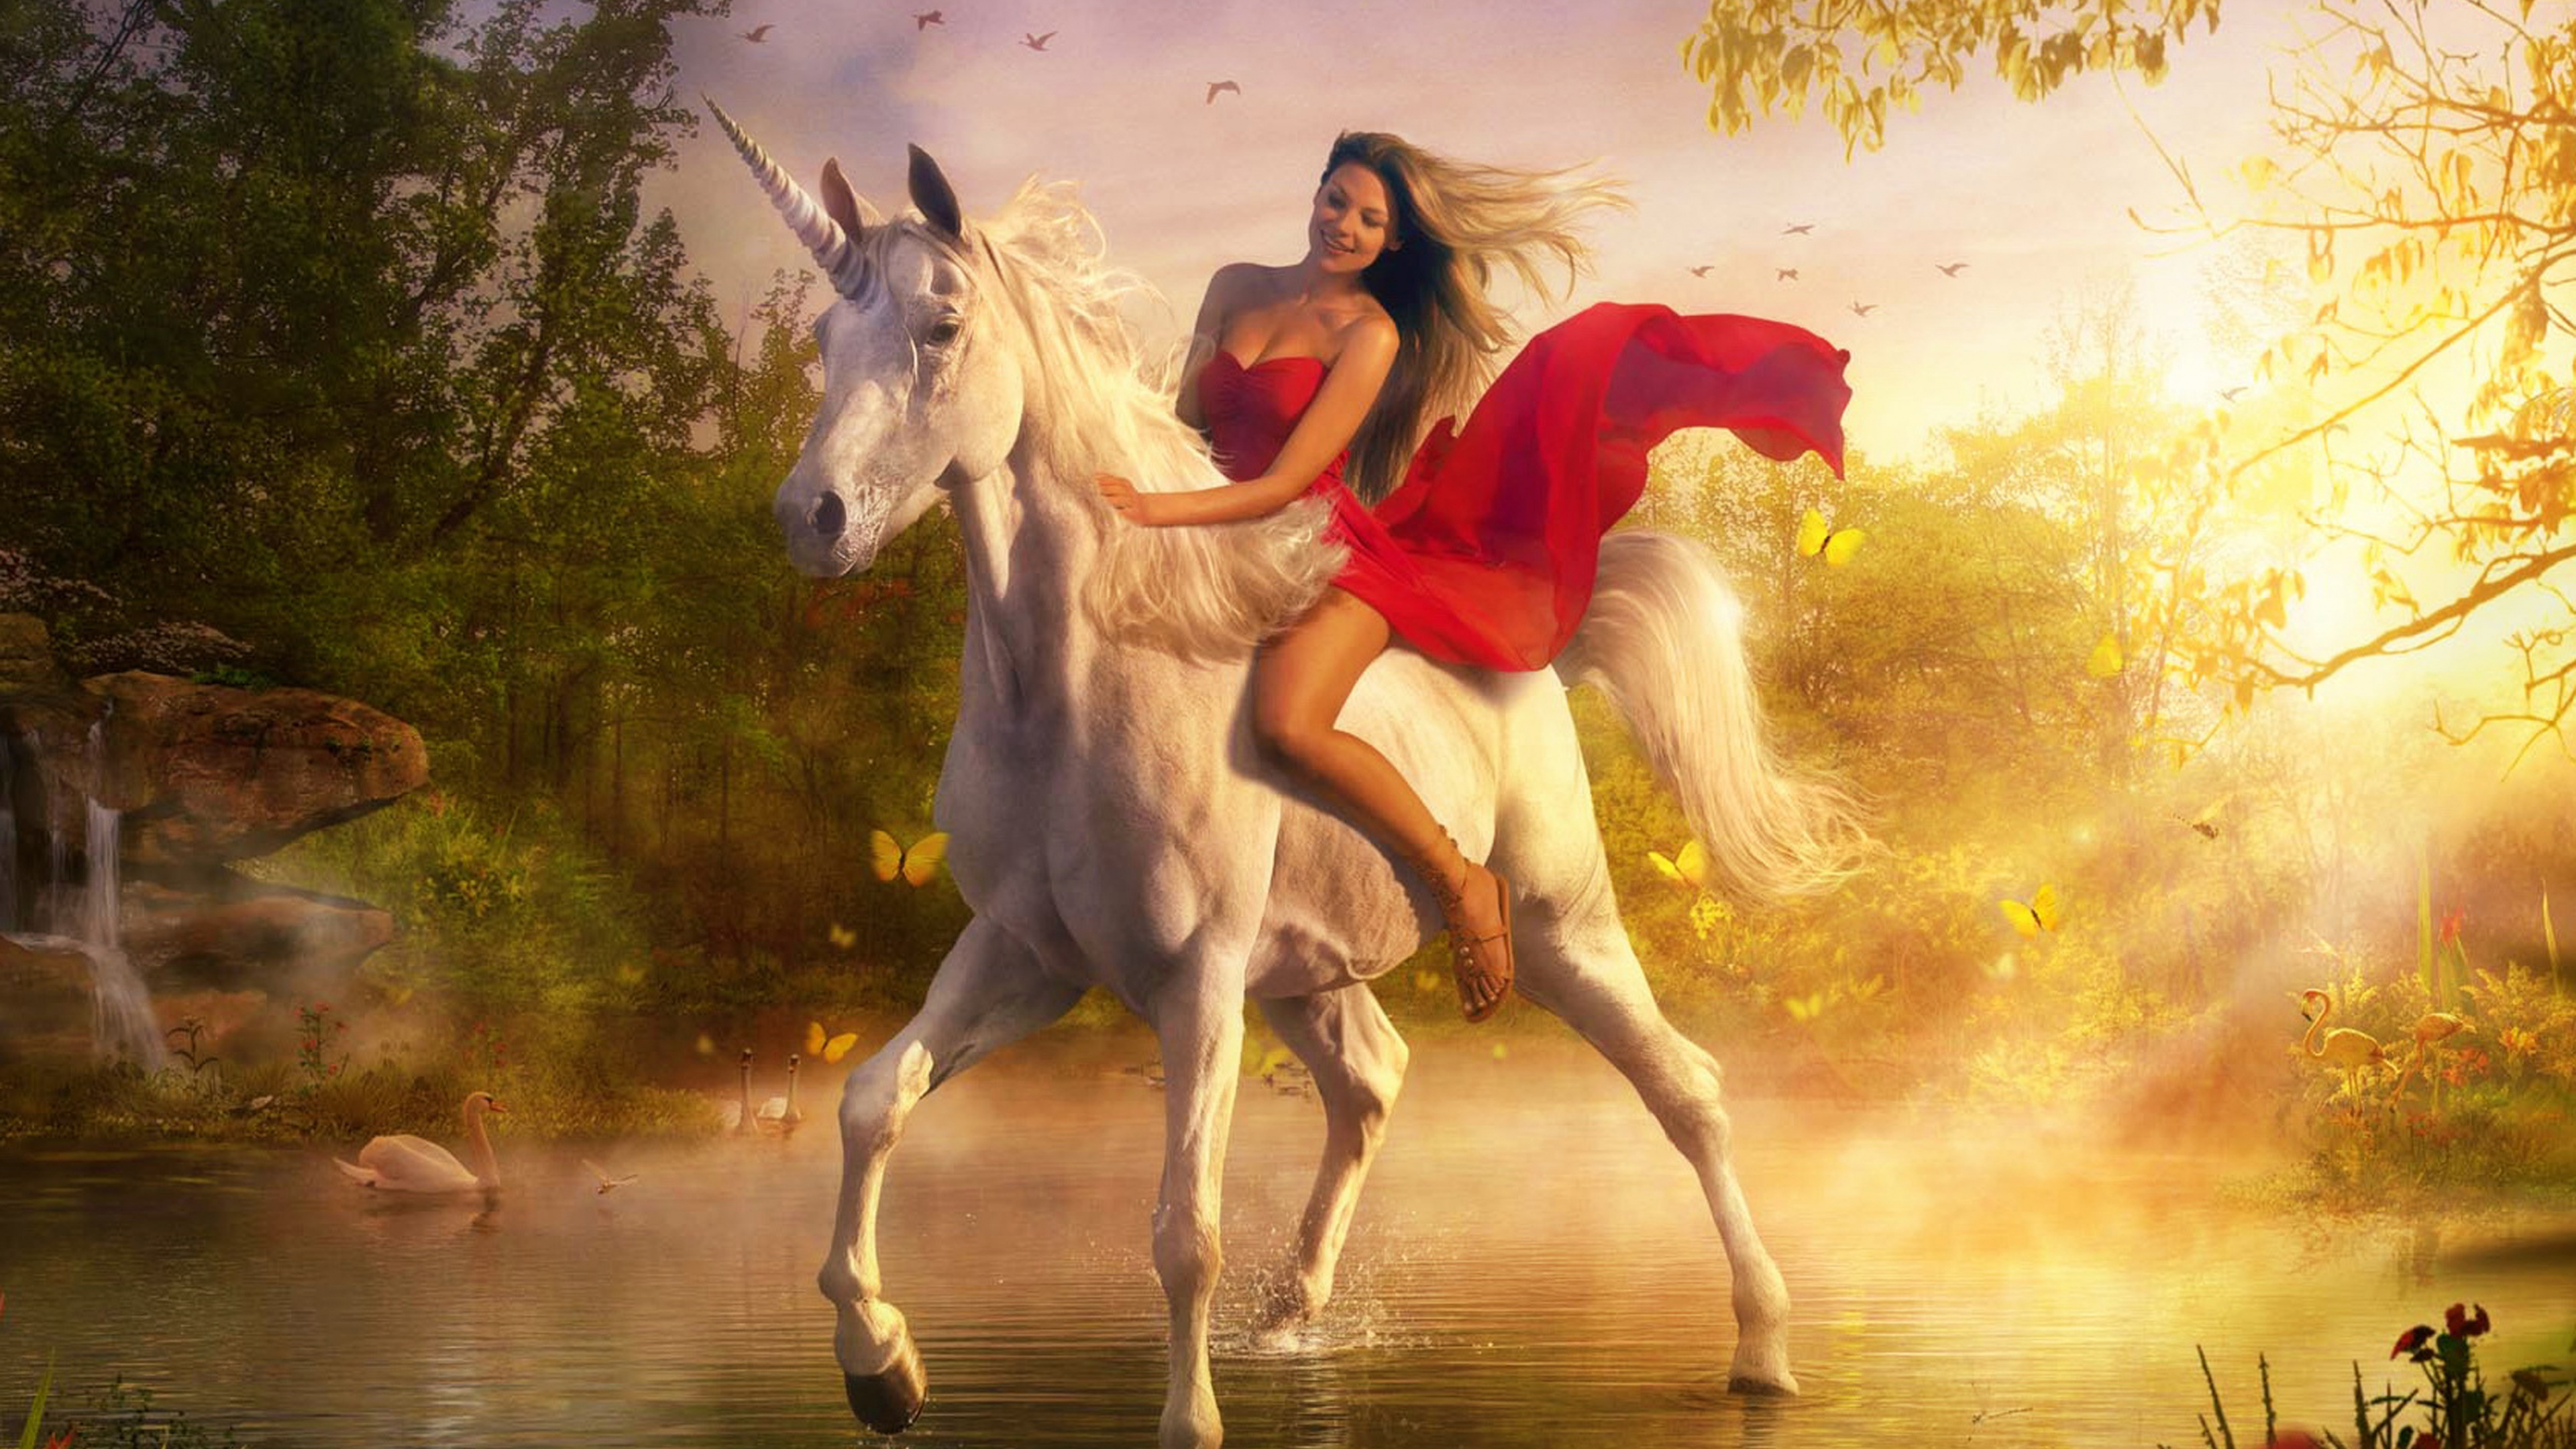 Woman in Red Dress Riding White Horse on Water. Wallpaper in 3840x2160 Resolution